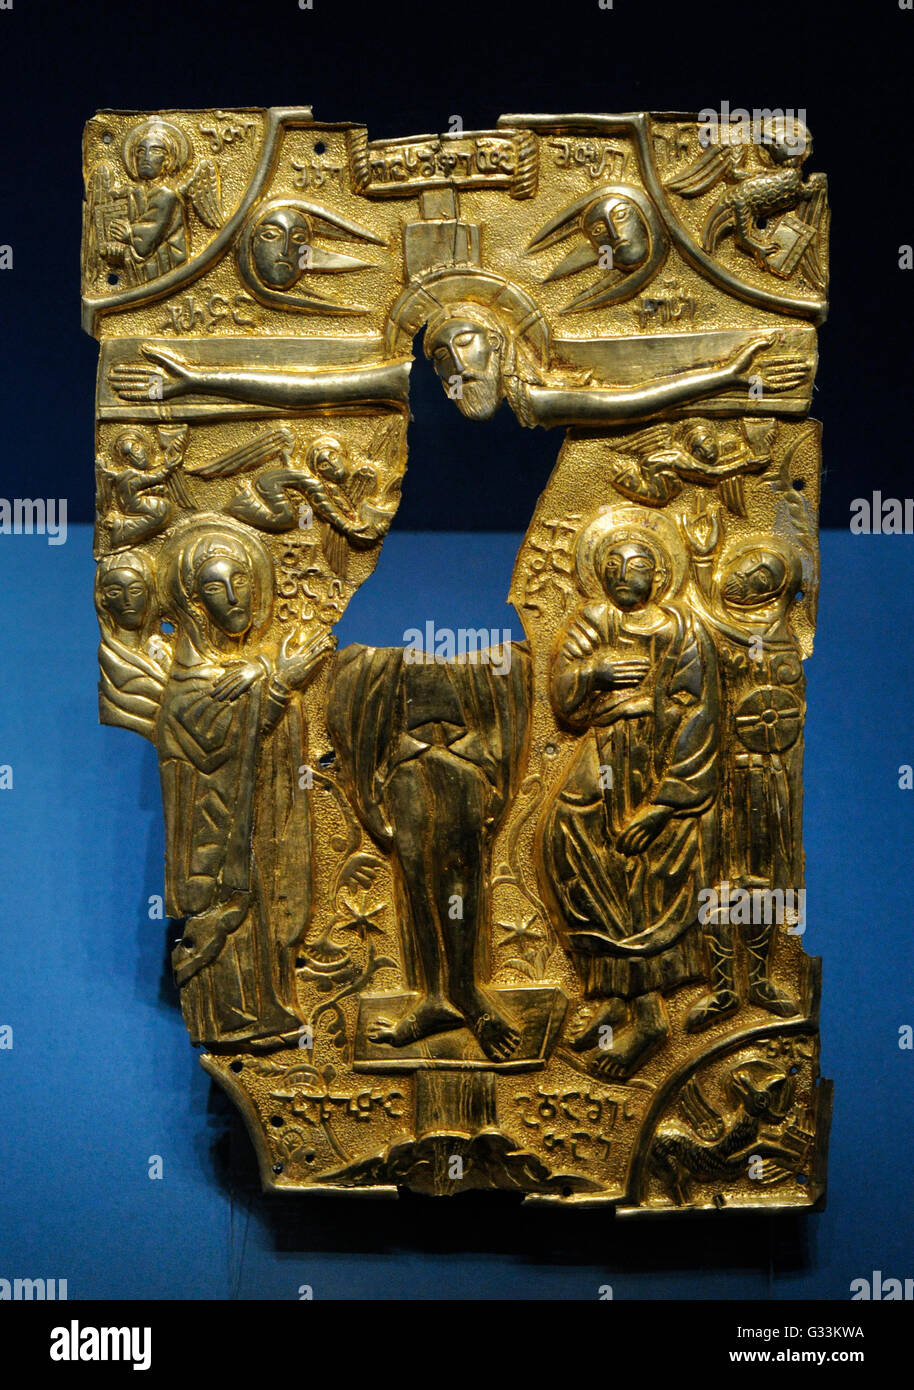 Trimming of Gospel cover. Silver, gilding, embossing. 17th c. Crucifixion. Georgia. The State Hermitage Museum. Saint Petersburg. Russia. Stock Photo